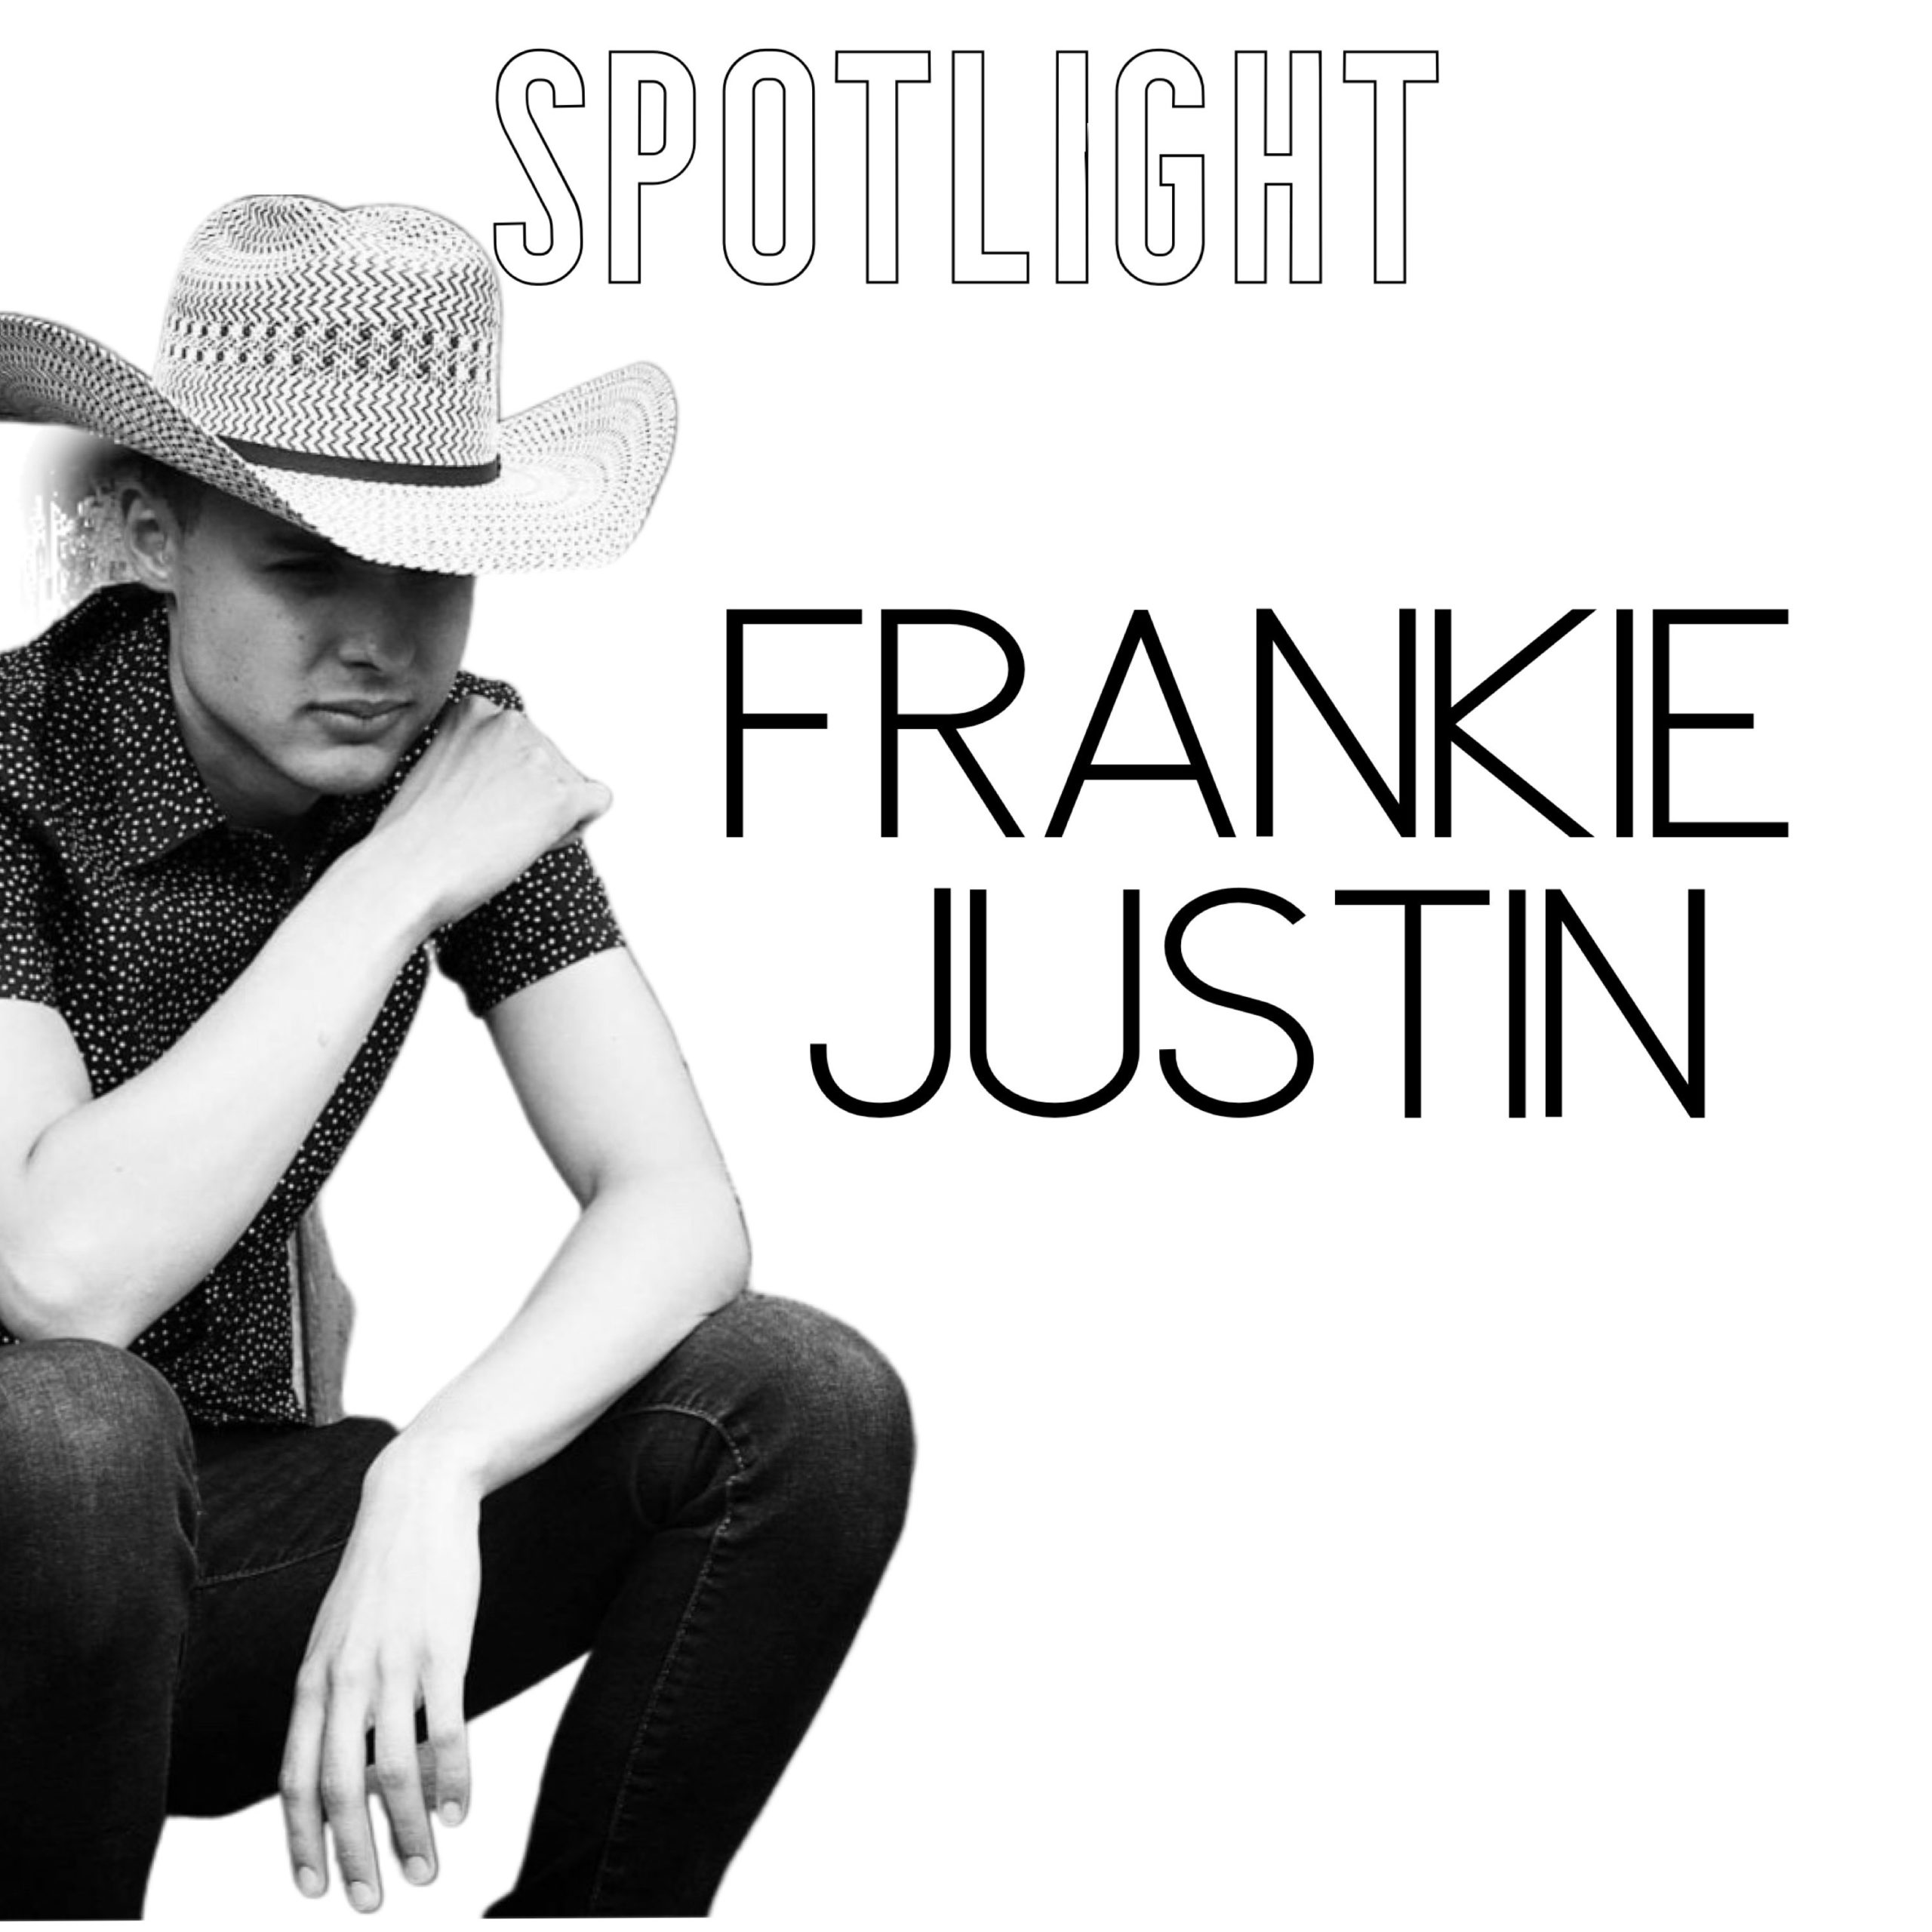 Click here to read more about Frankie Justin